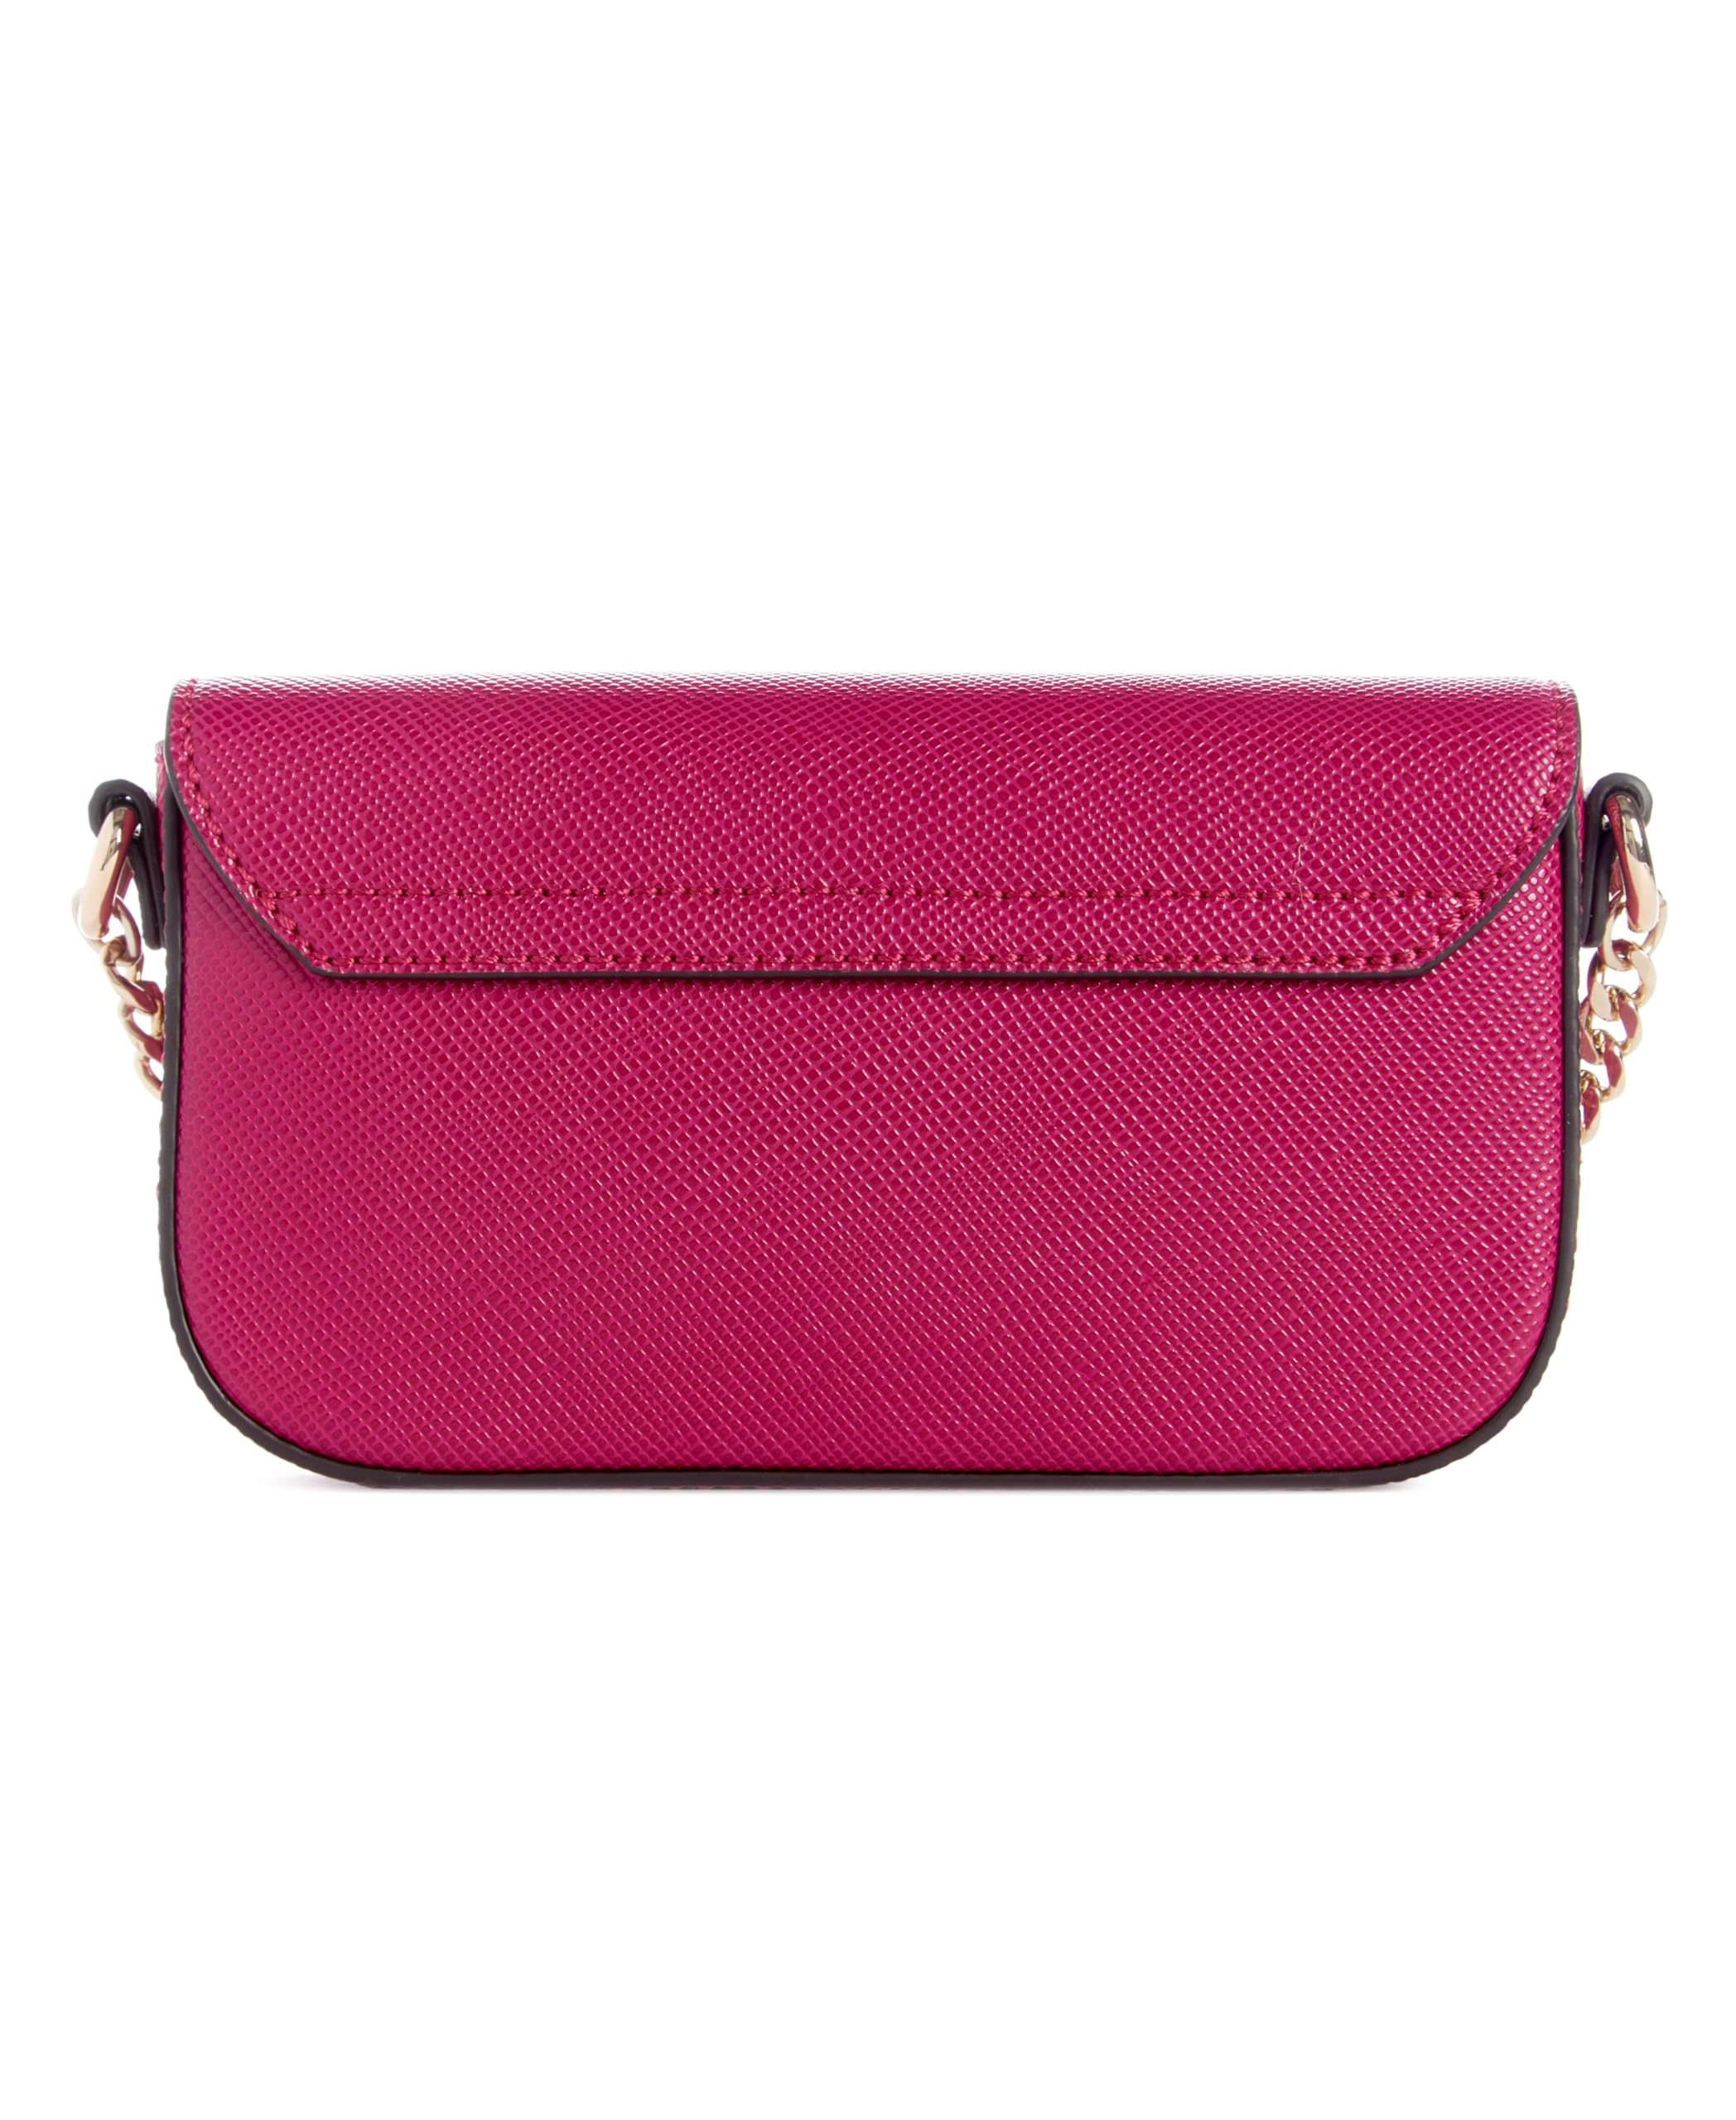 GUESS Brynlee Micro Mini, Boysenberry